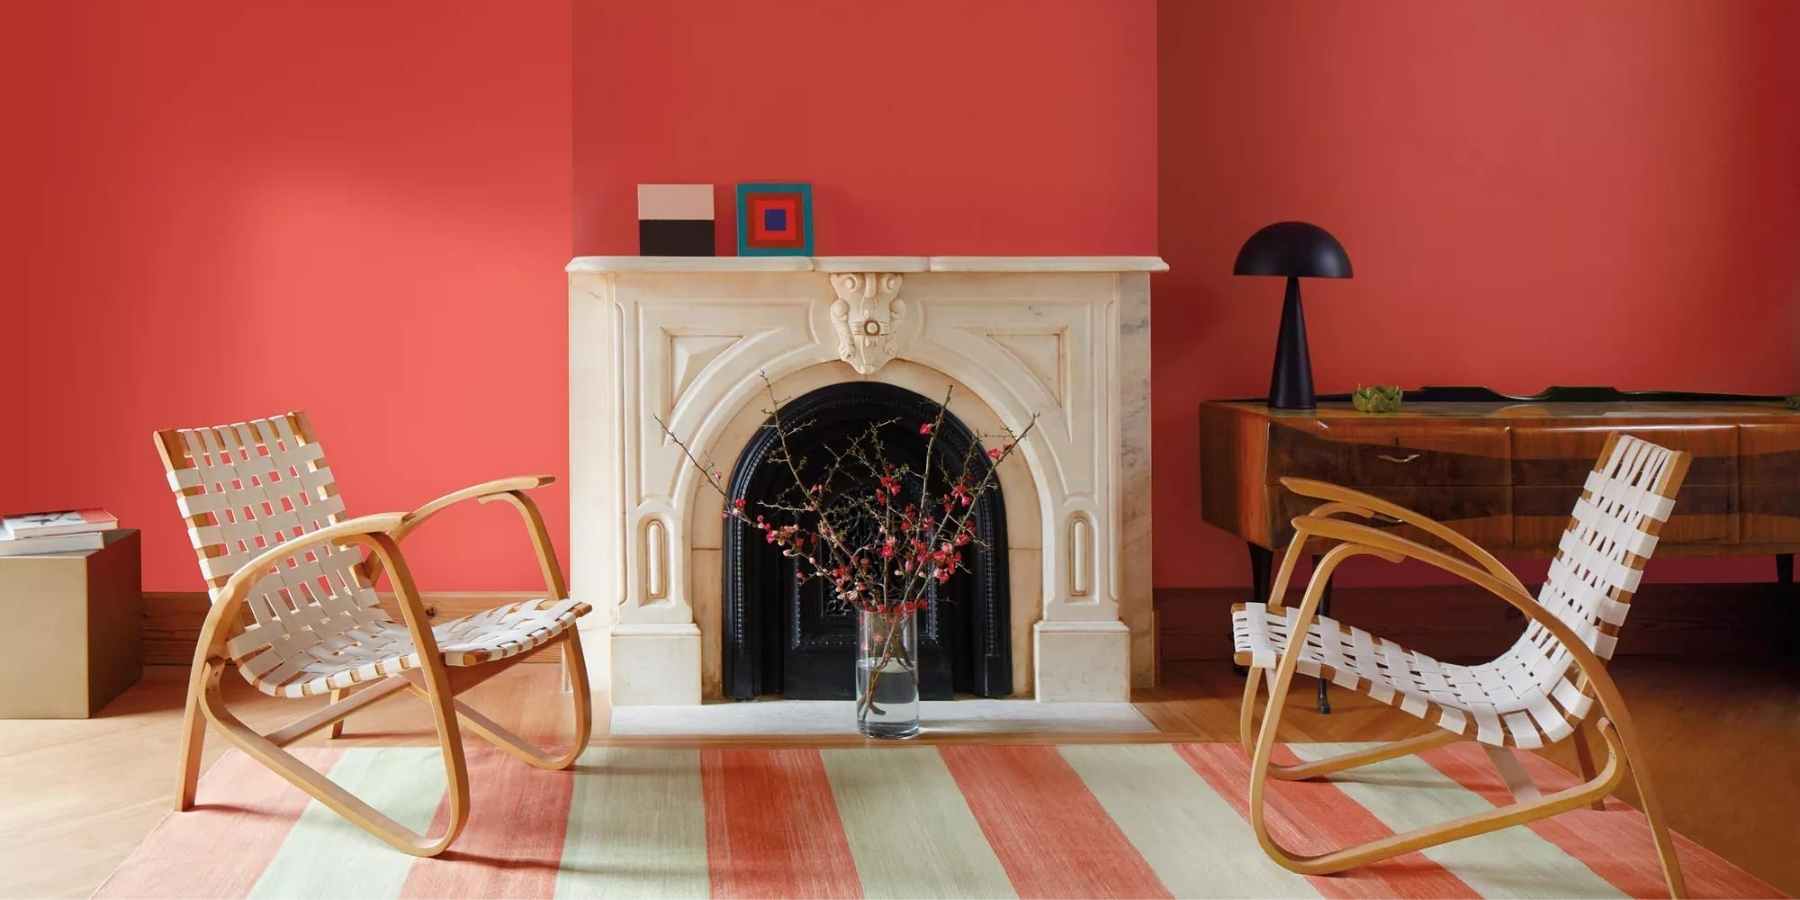 Find Benjamin Moore's Color of the Year at Creative Paint in Los Angeles metropolitan area. 